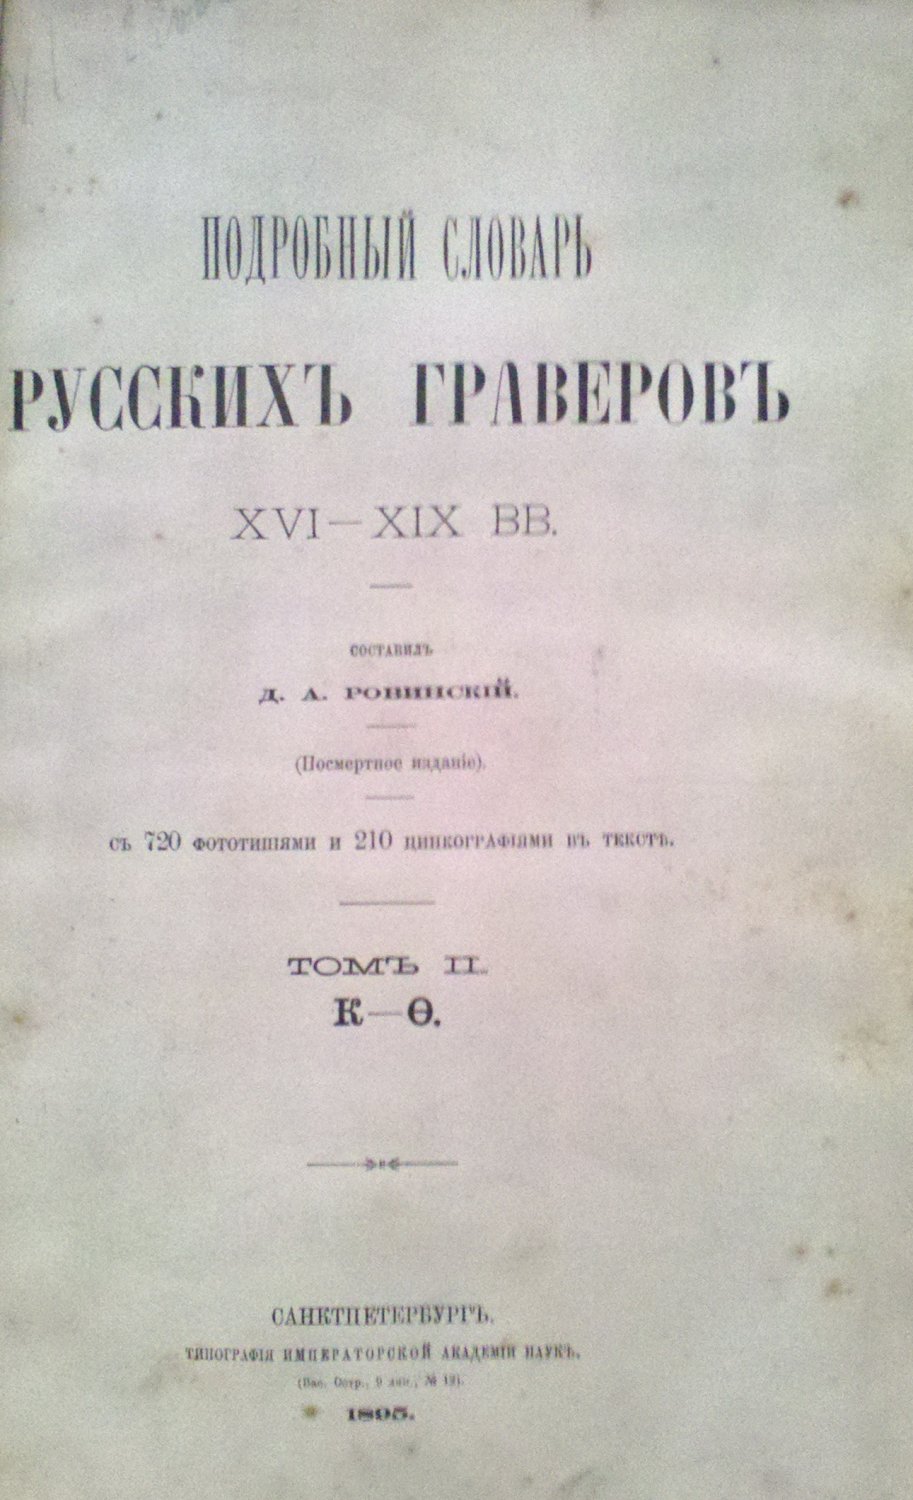 Rovinsky, A detailed dictionary of Russian engravers of the XVI-XIX cent., 1895